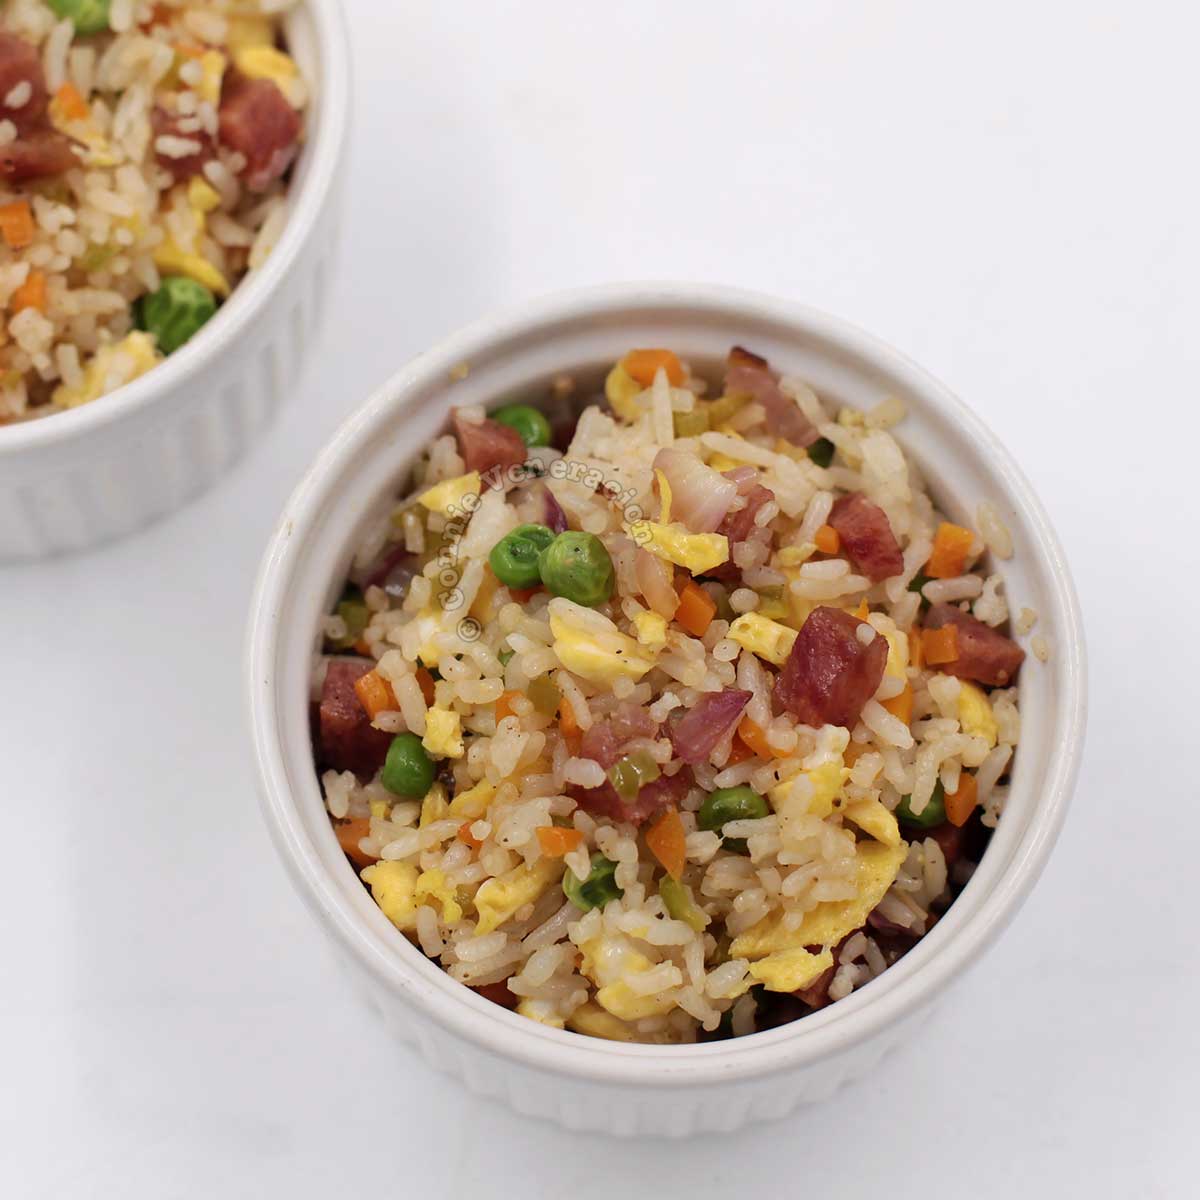 Chinese-style fried rice